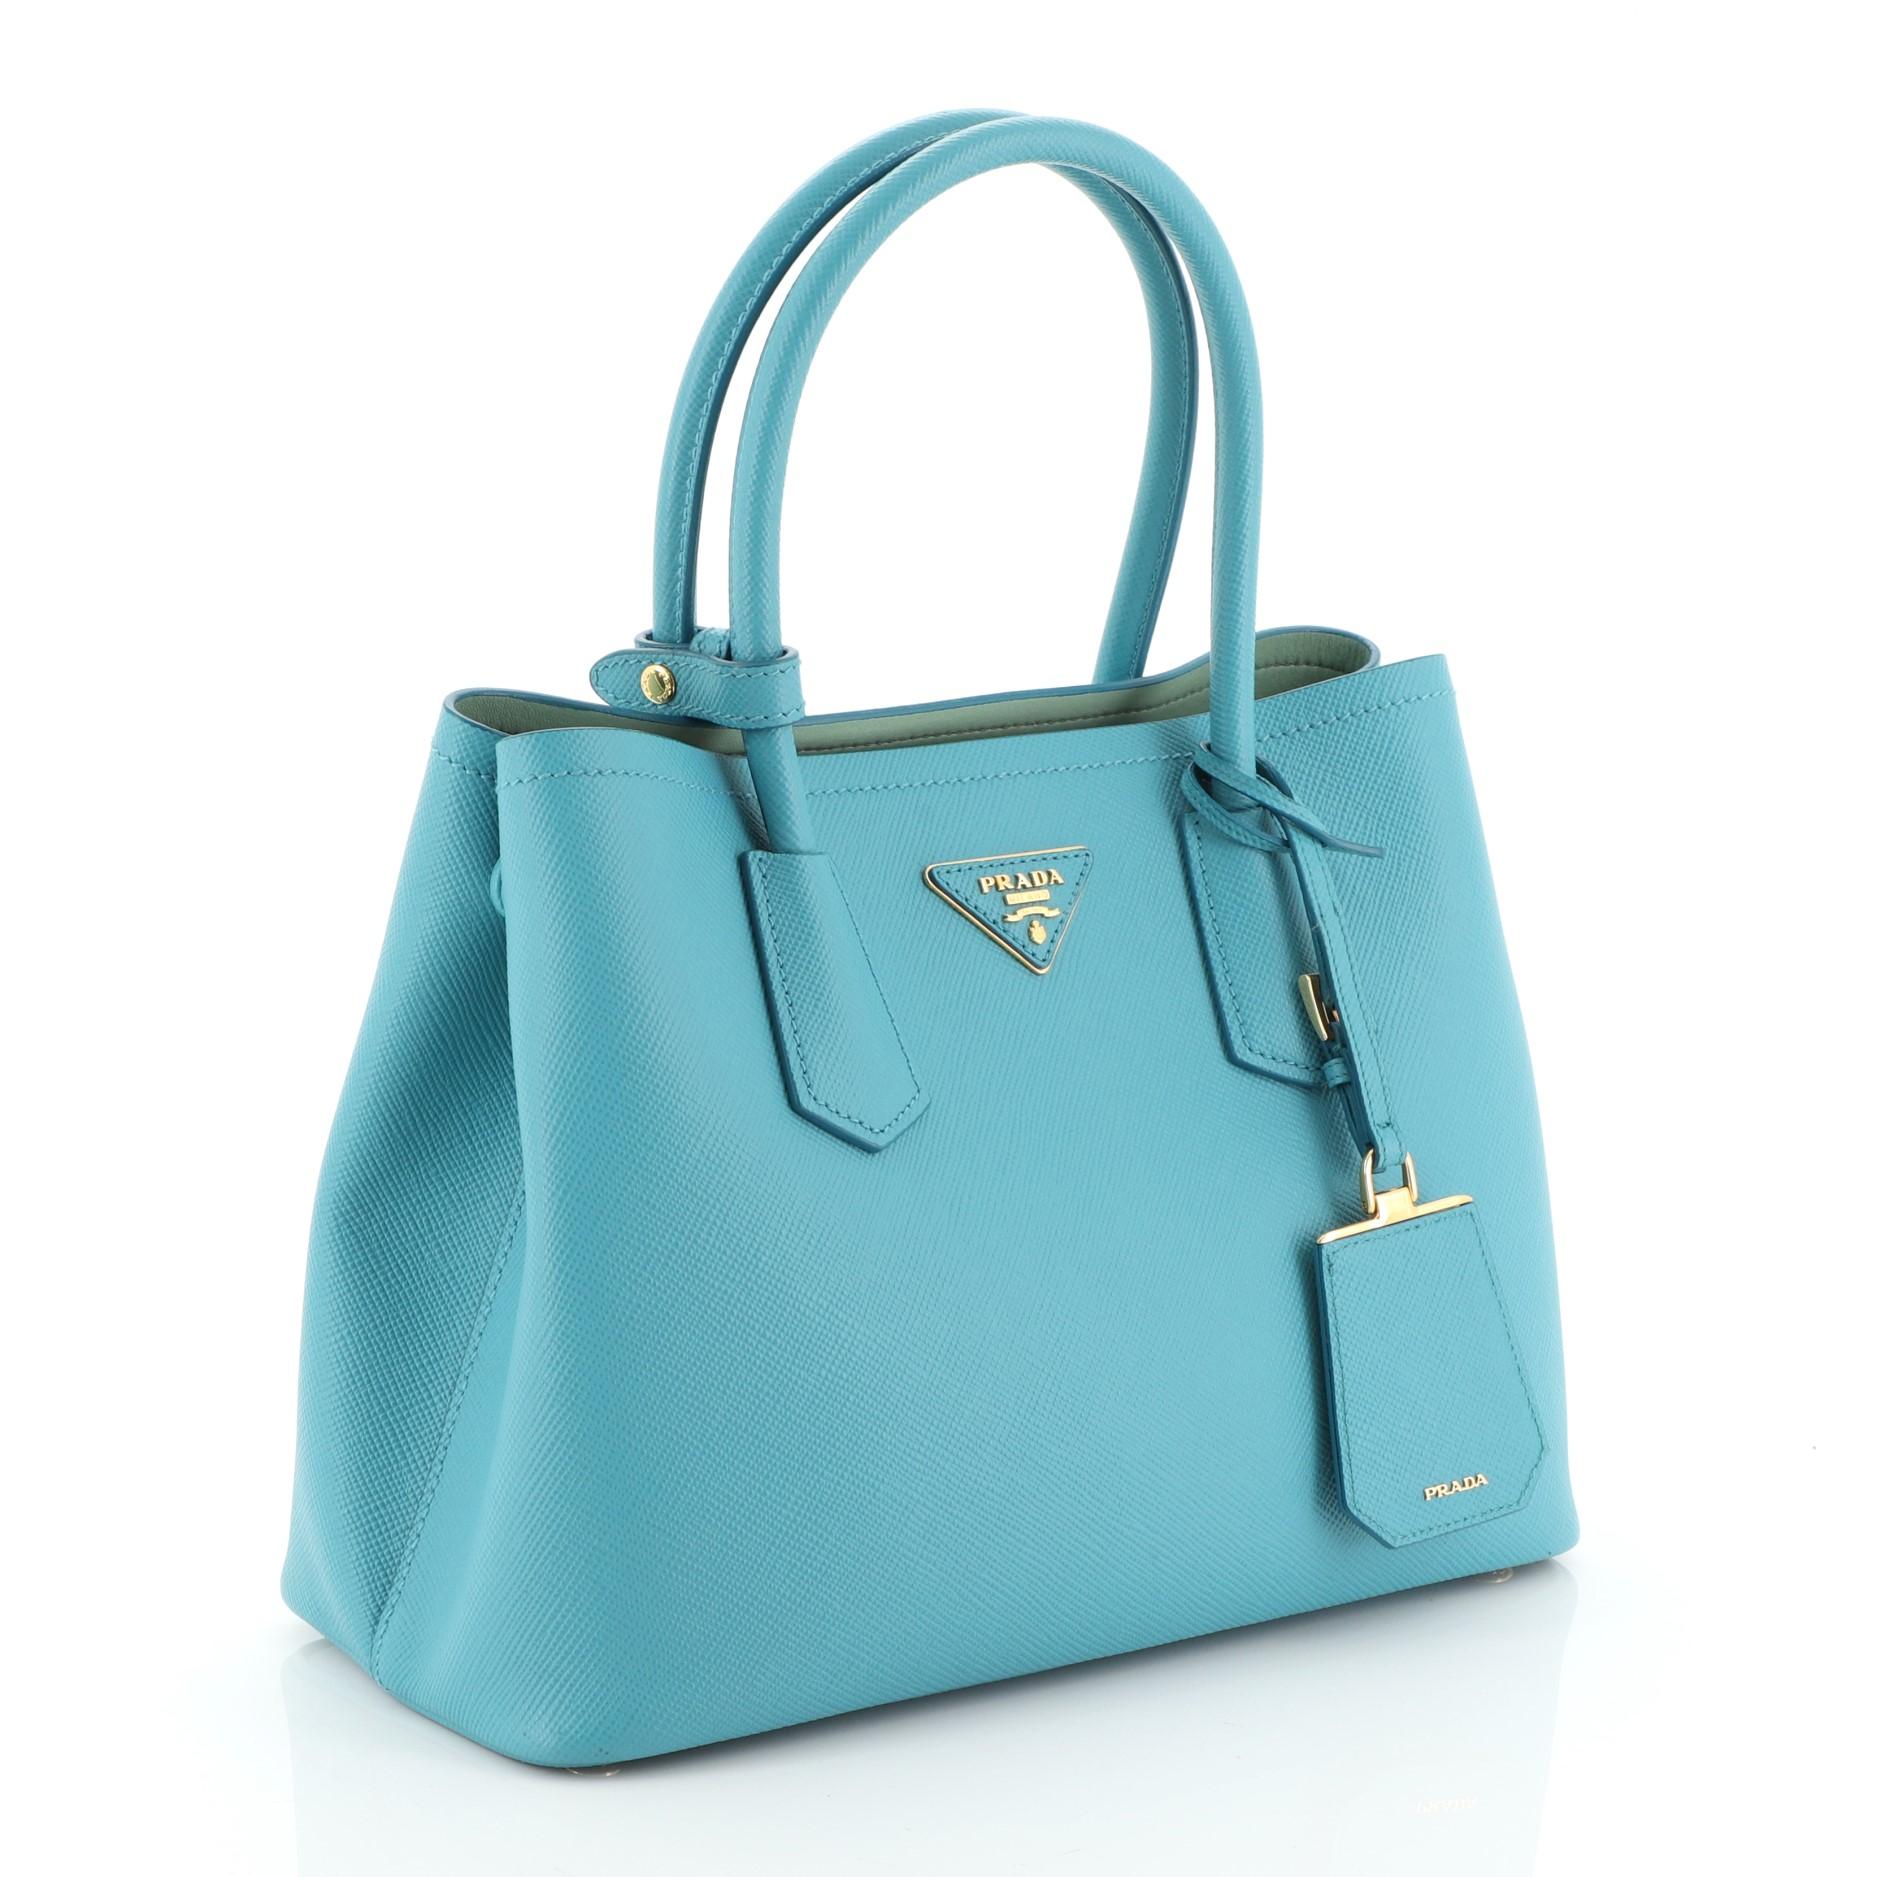 This Prada Cuir Double Tote Saffiano Leather Small, crafted from blue saffiano leather, features dual rolled handles, triangle logo at the center, and gold-tone hardware. It opens to a green leather interior with middle flap compartment. 

Estimated